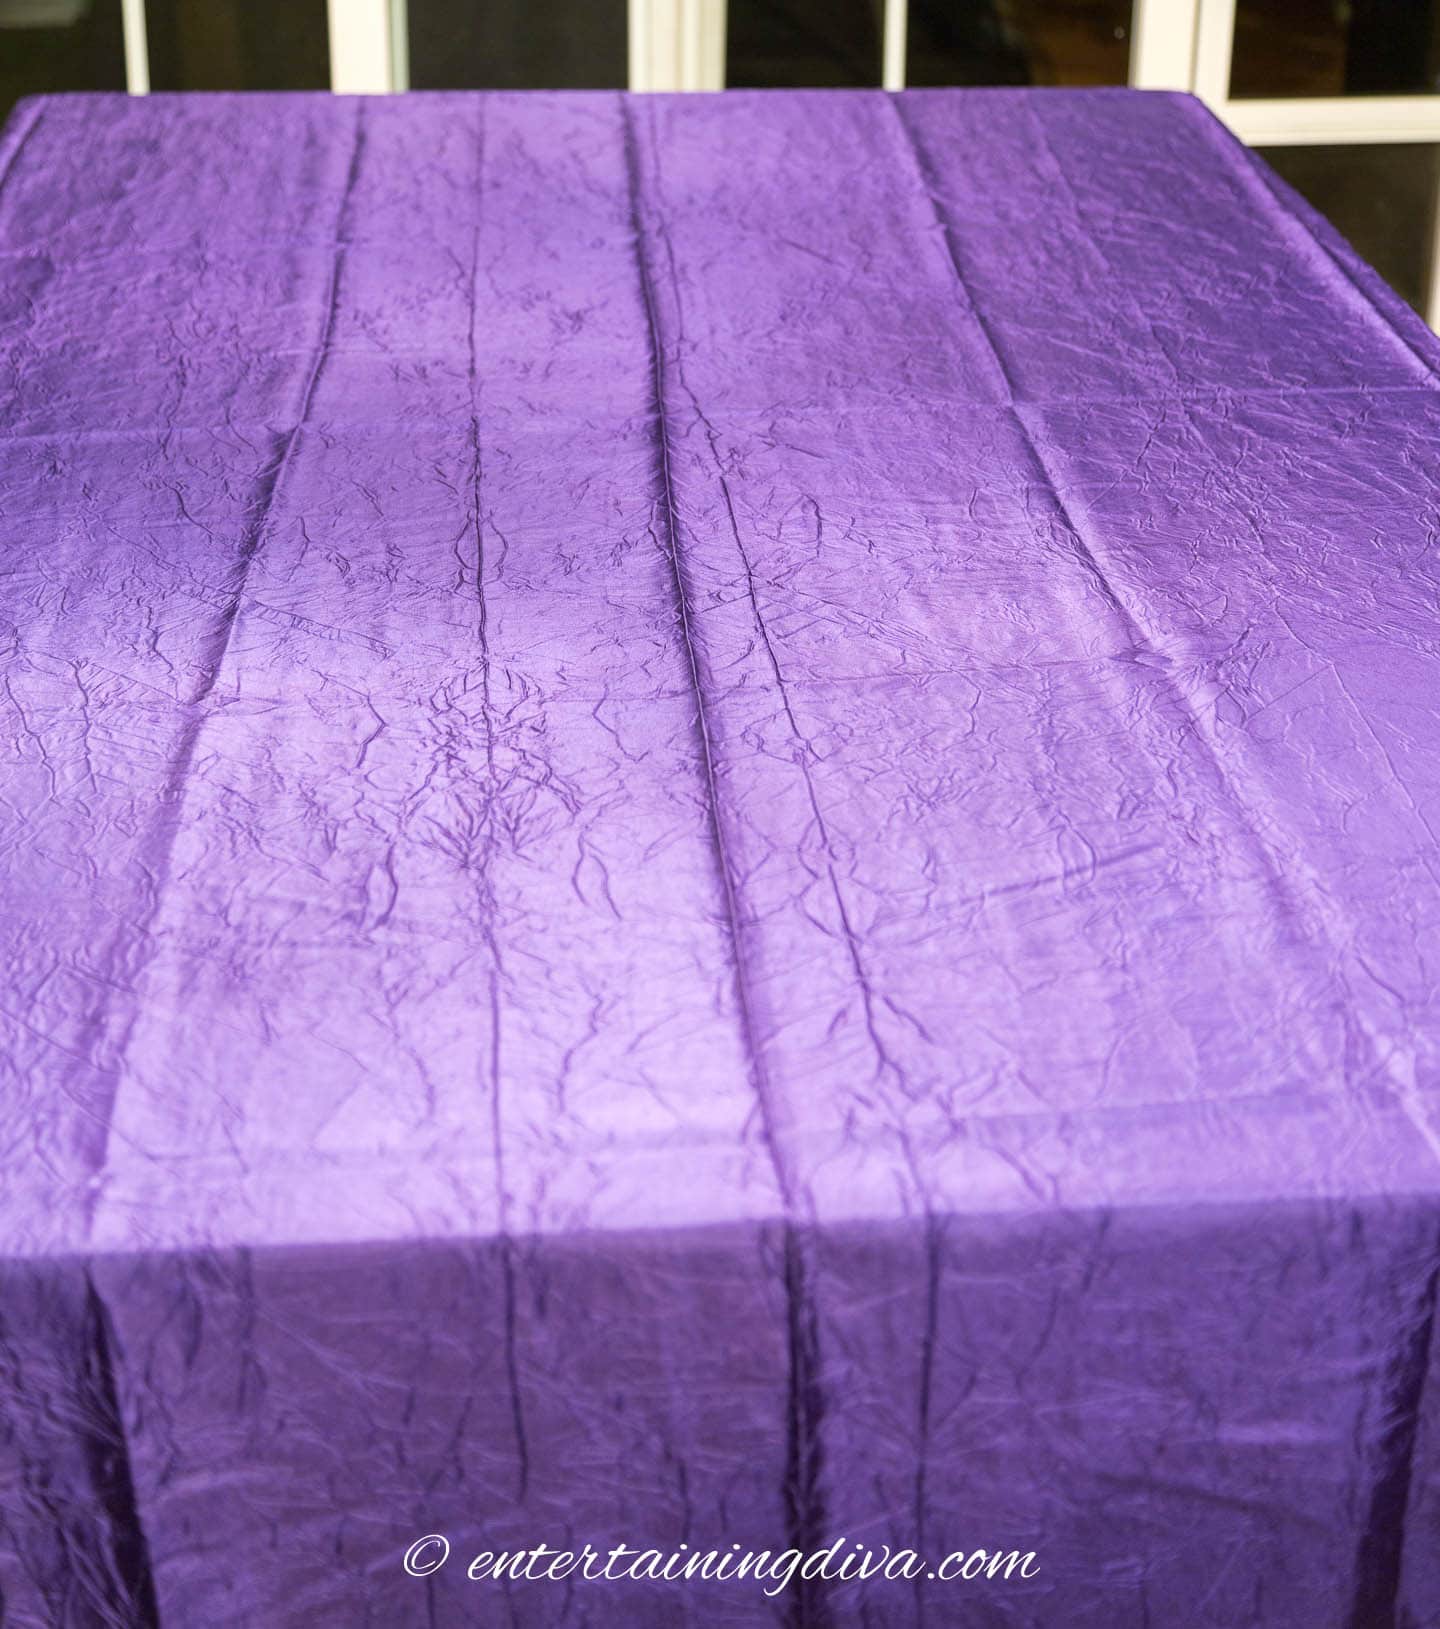 Purple tablecloth on a table